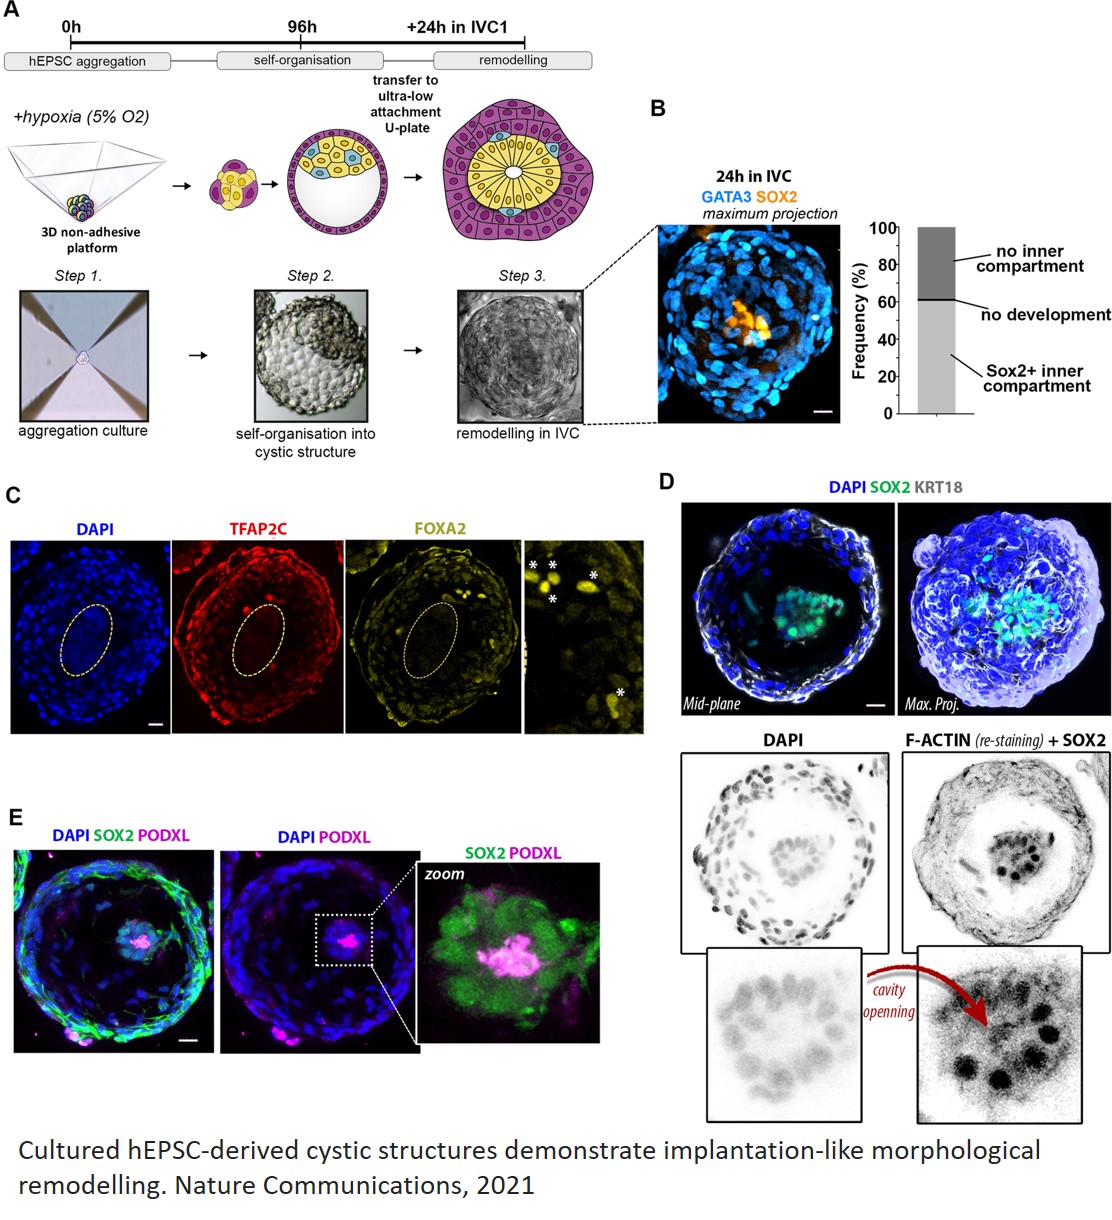 Human embryo-like structures from stem cells